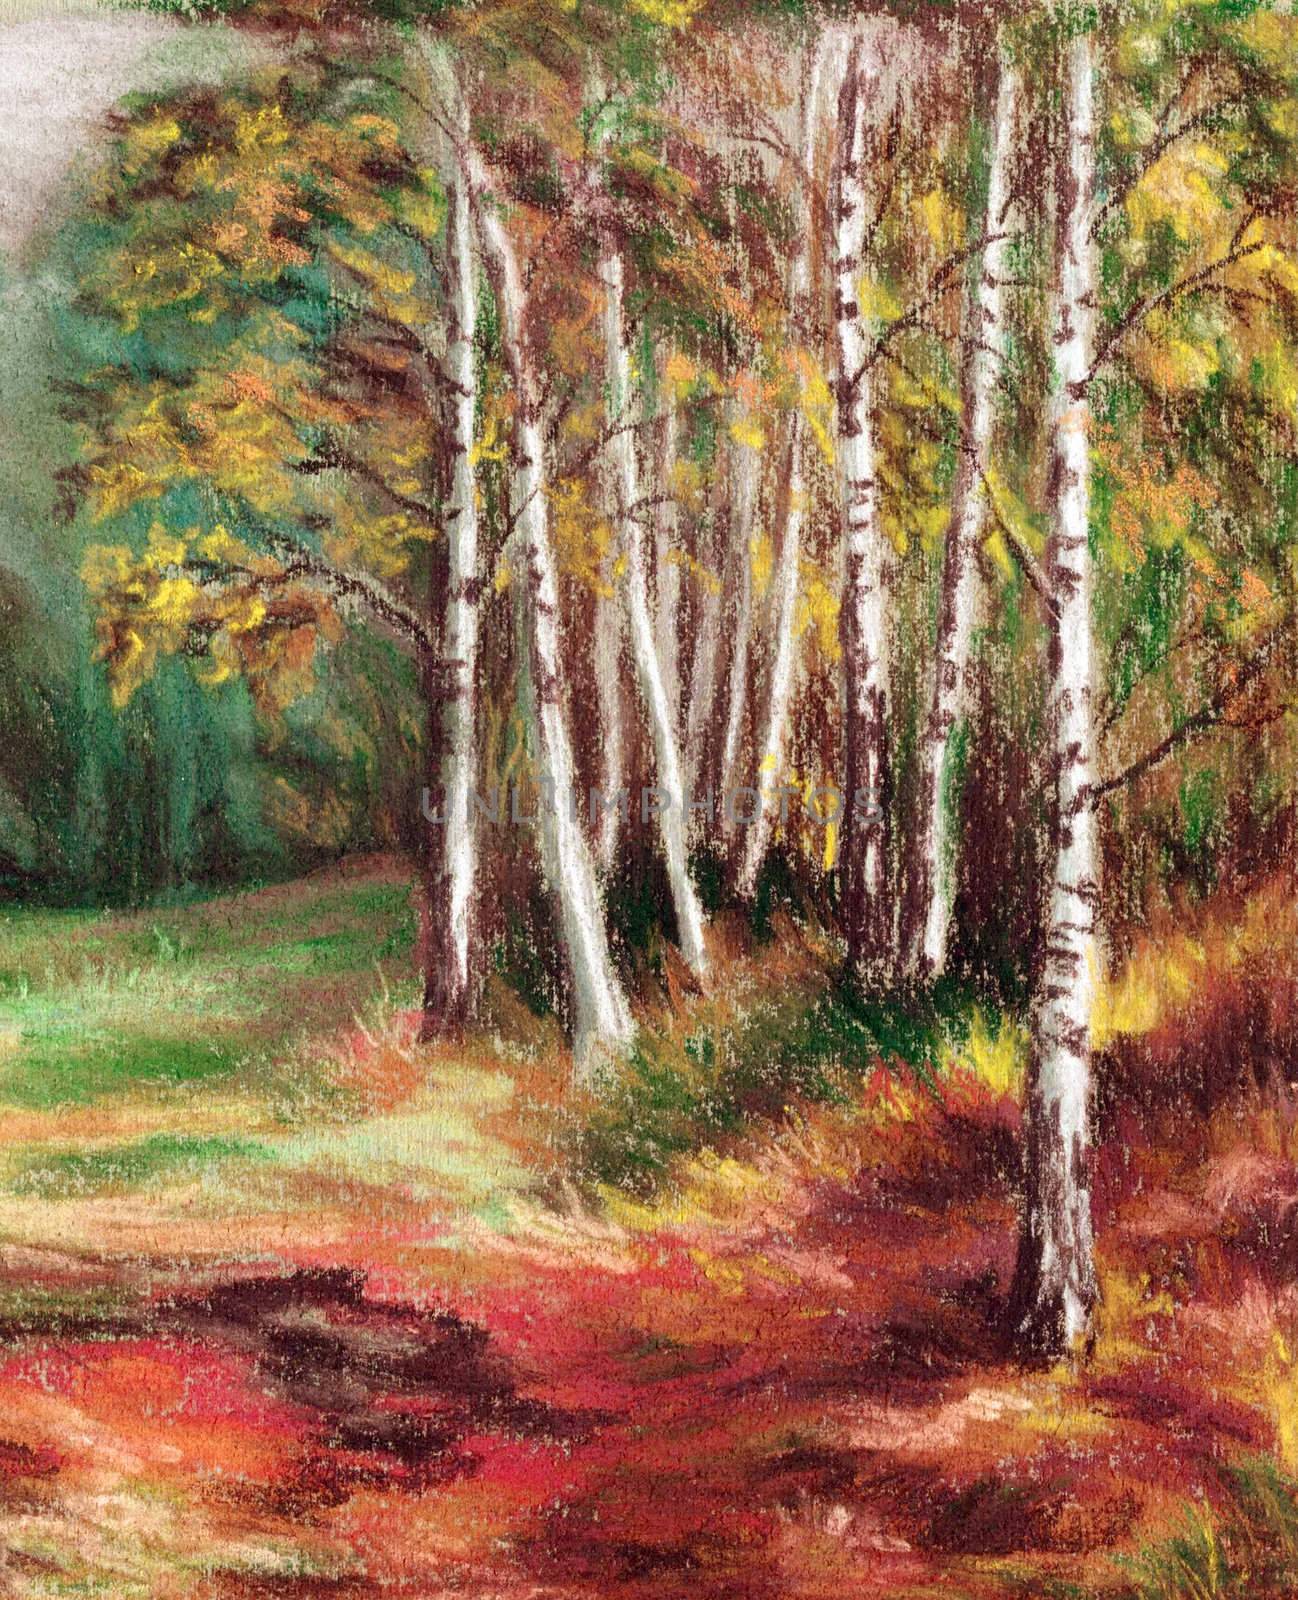 Picture, landscape, autumn forest. Hand draw, drawing a pastel on a cardboard